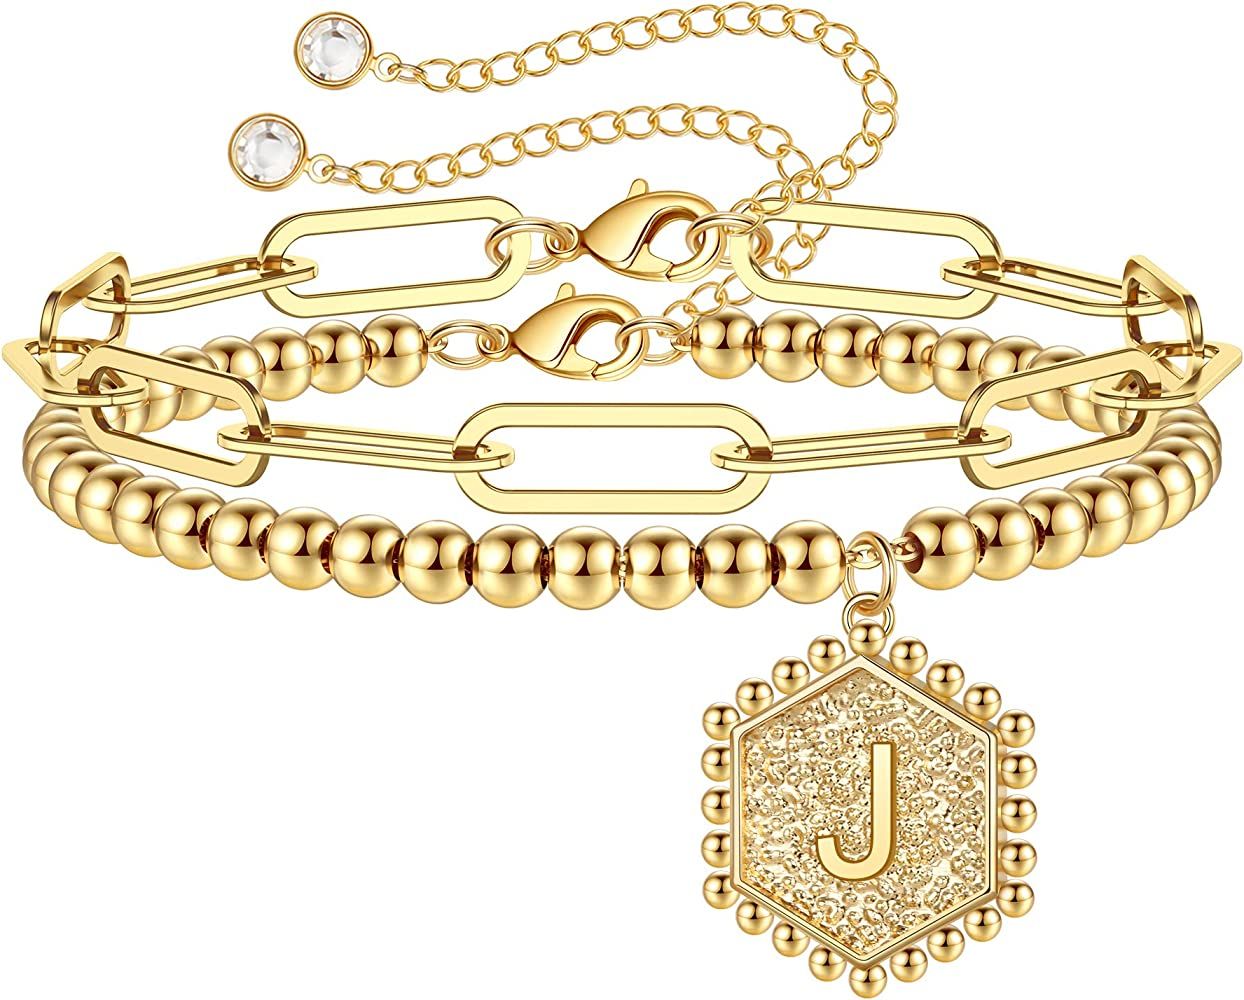 Gold Initial Bracelets for Women, 14K Gold Plated Beaded Bracelets for Women Teen Girls Hexagon Pend | Amazon (US)